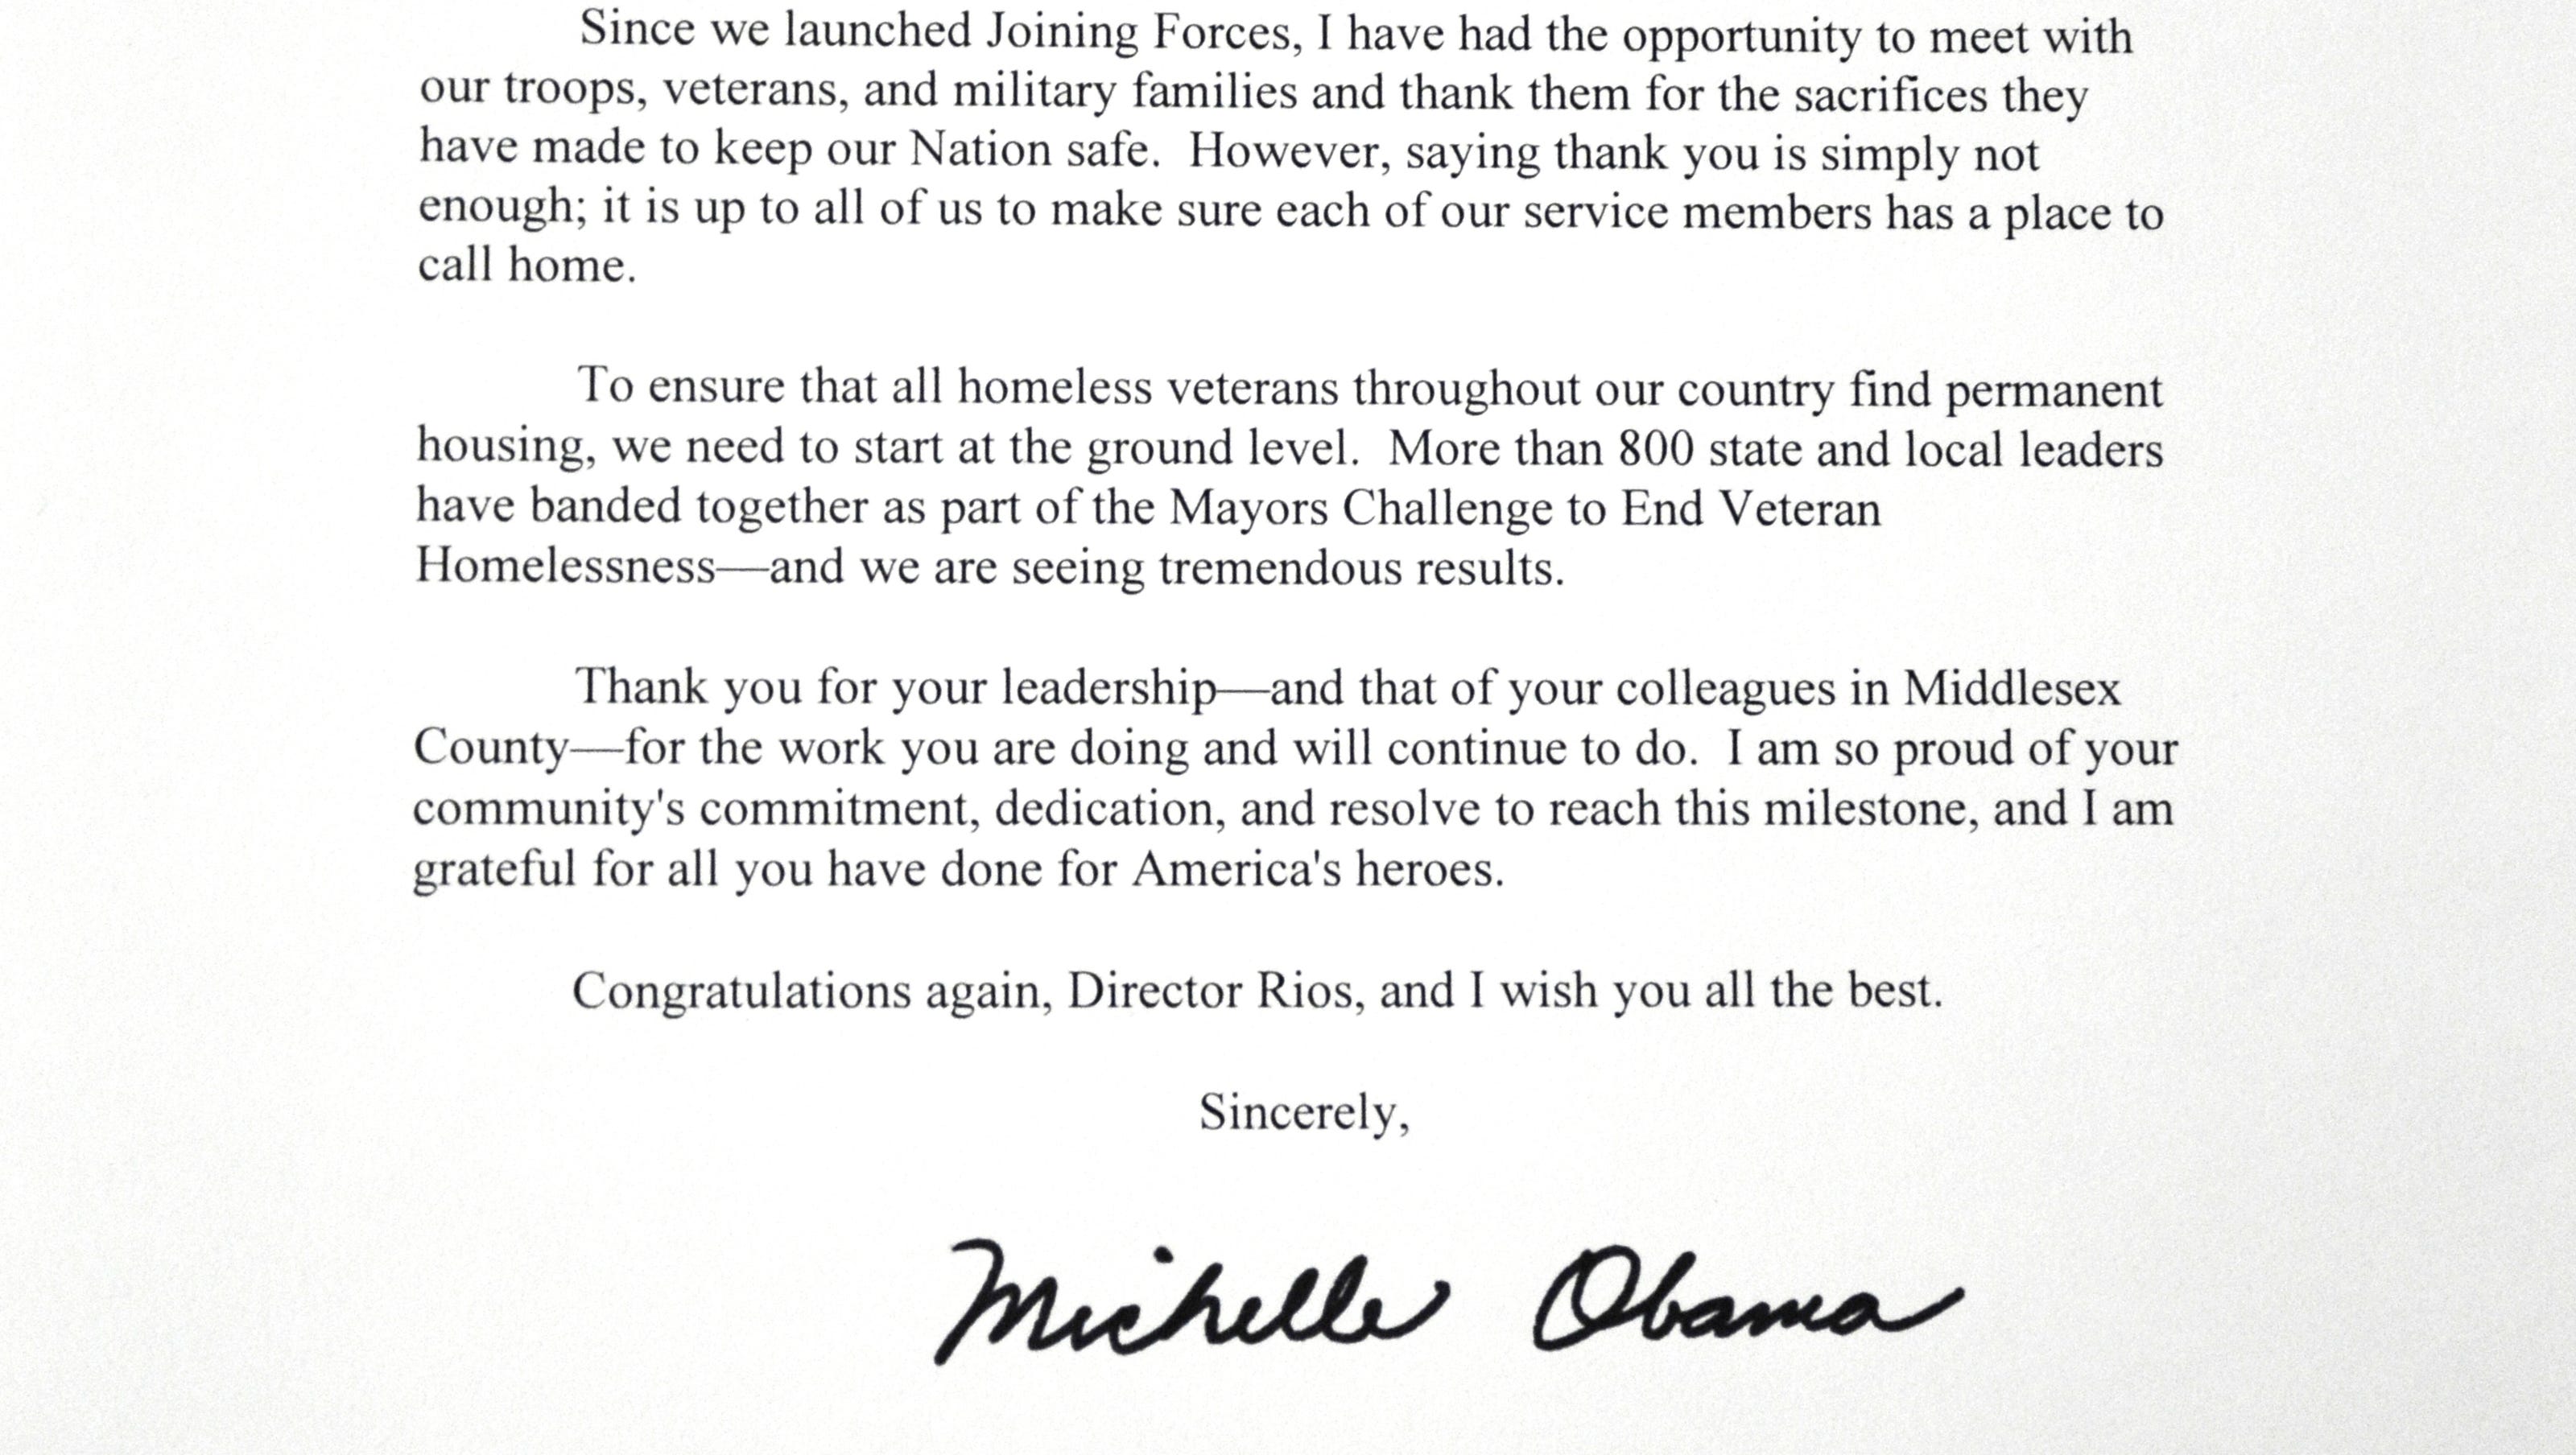 Michelle Obama Congratulates Middlesex County On Effectively Ending Veterans Homelessness